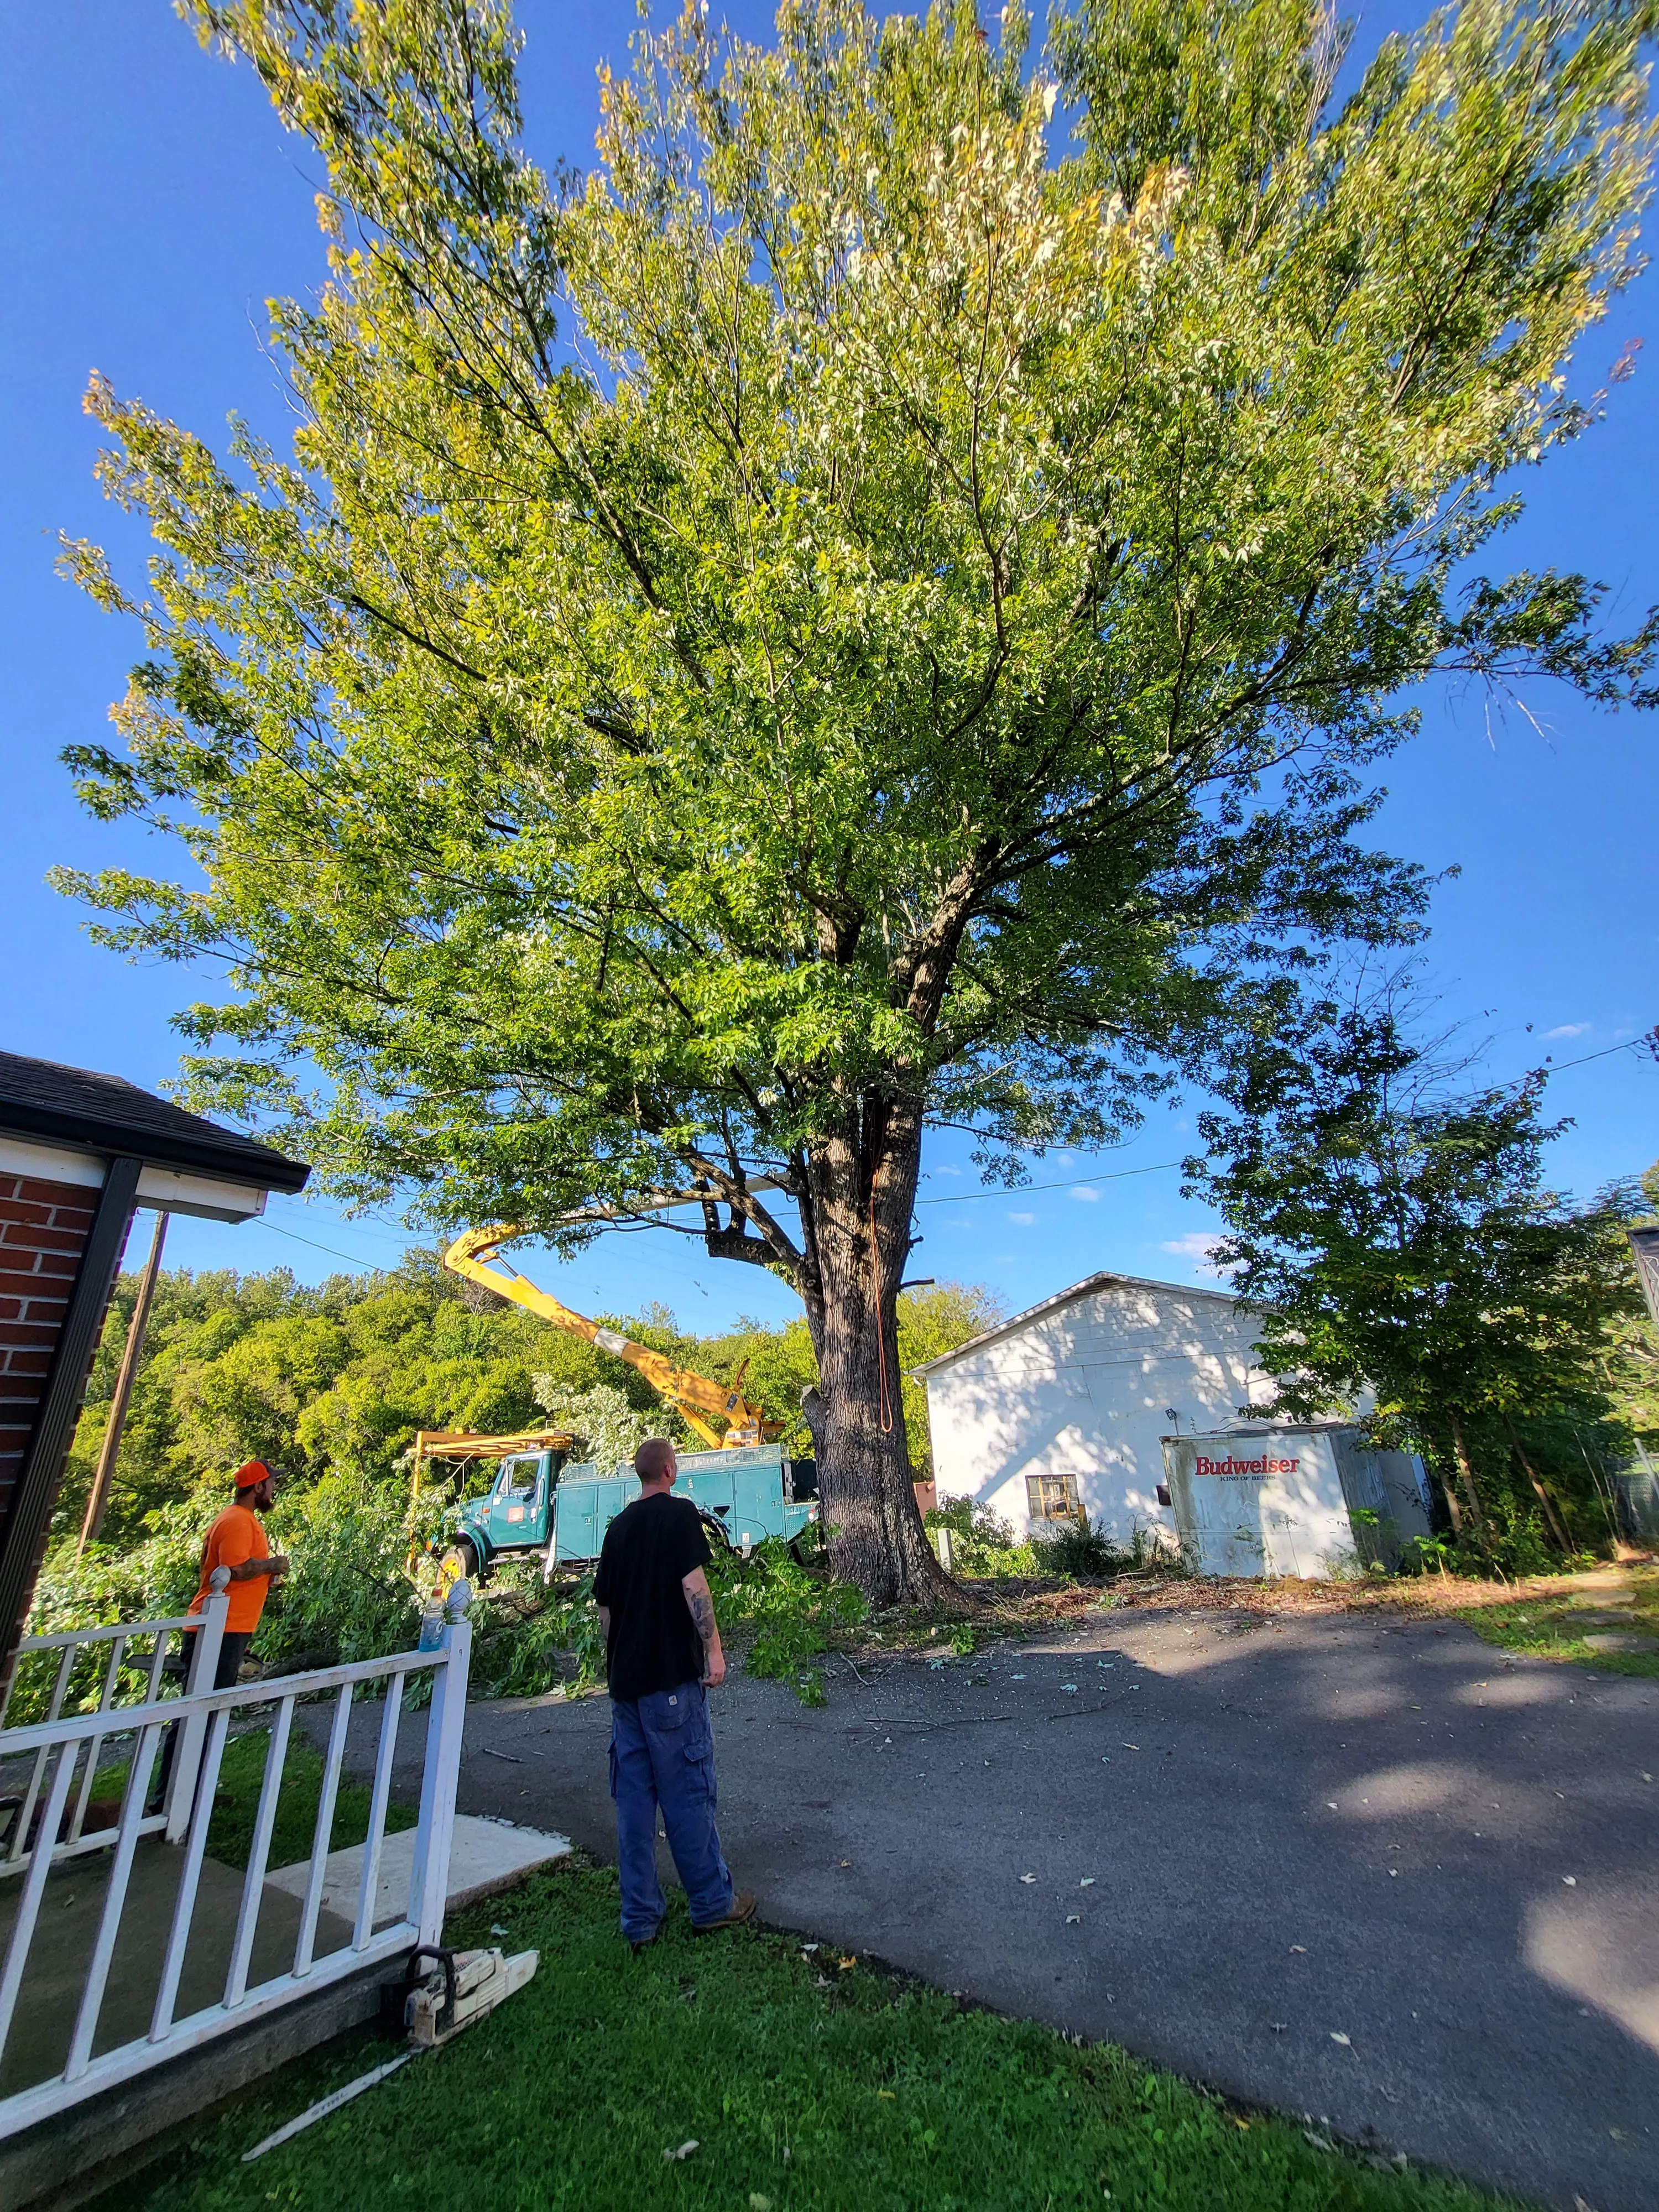 Tree Trimming for Smitty's Tree Service in Ringgold, VA